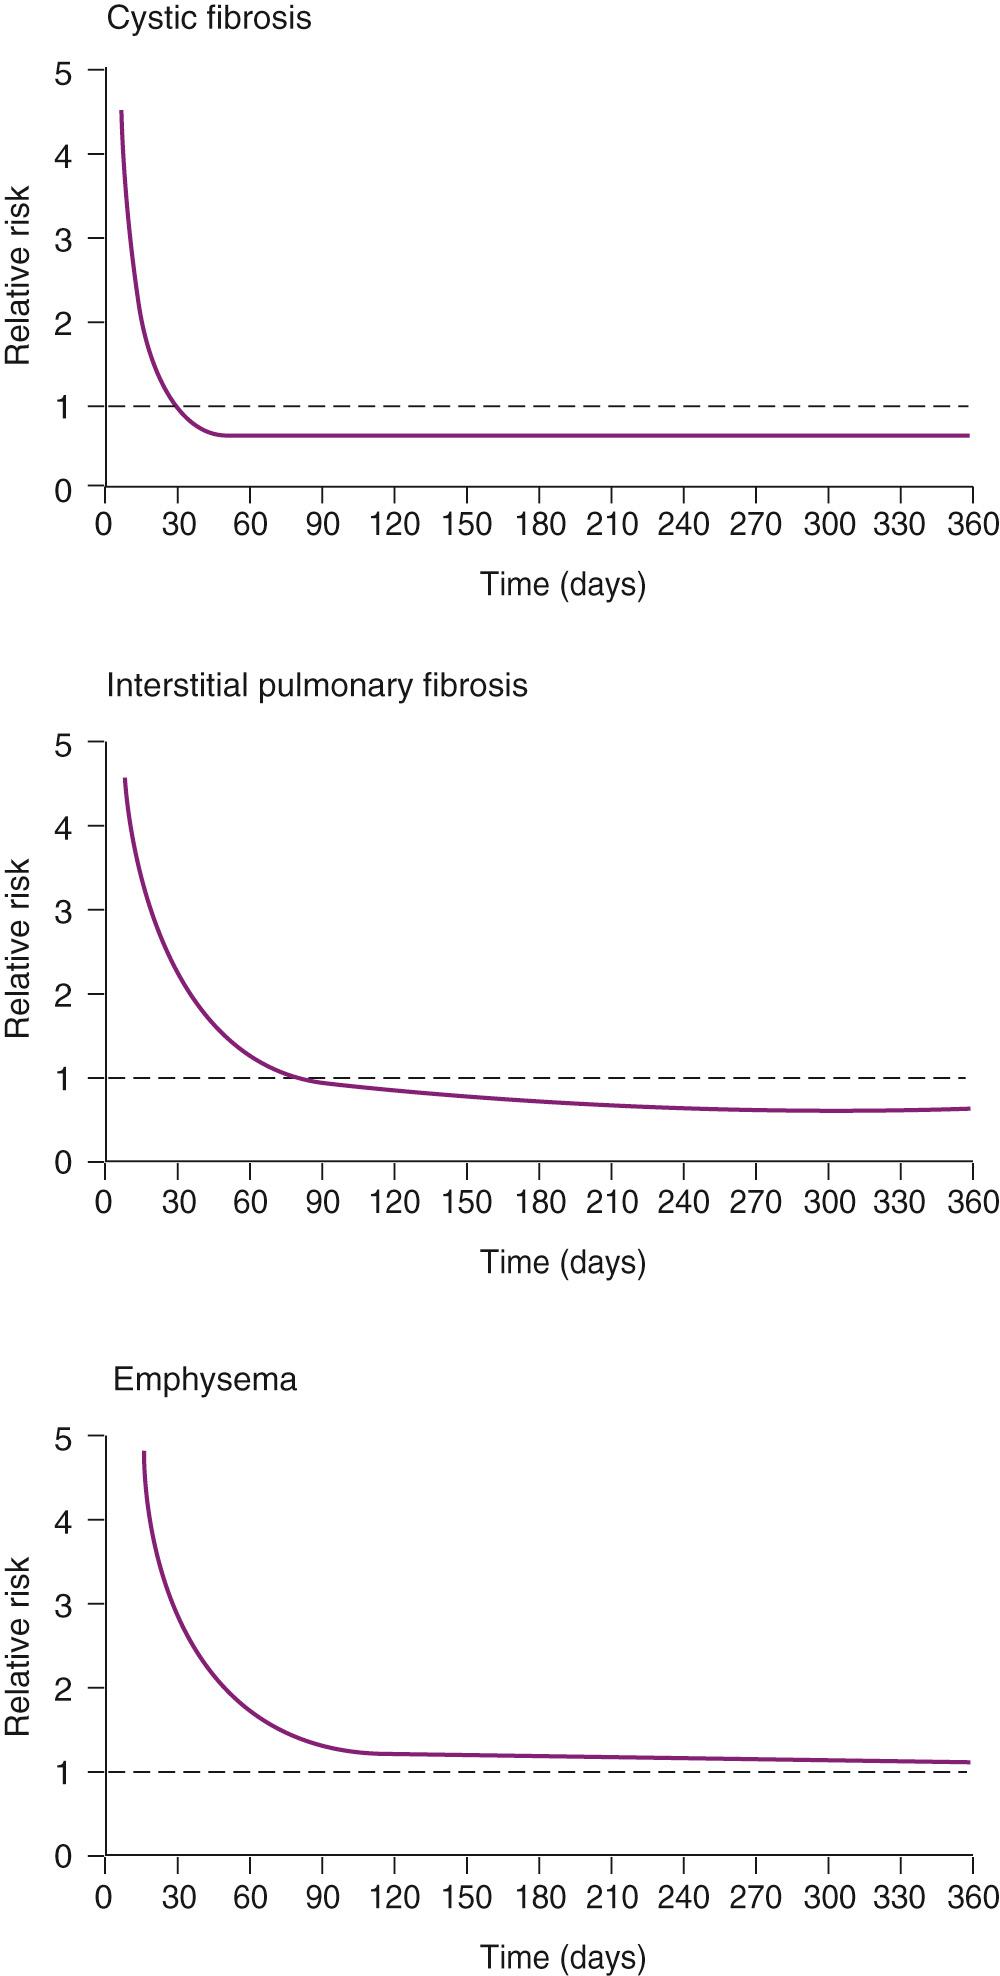 FIGURE 13-4, Relative risk of death after lung transplantation compared with risk faced by remaining on the waiting list, stratified by underlying diagnosis leading to transplantation.